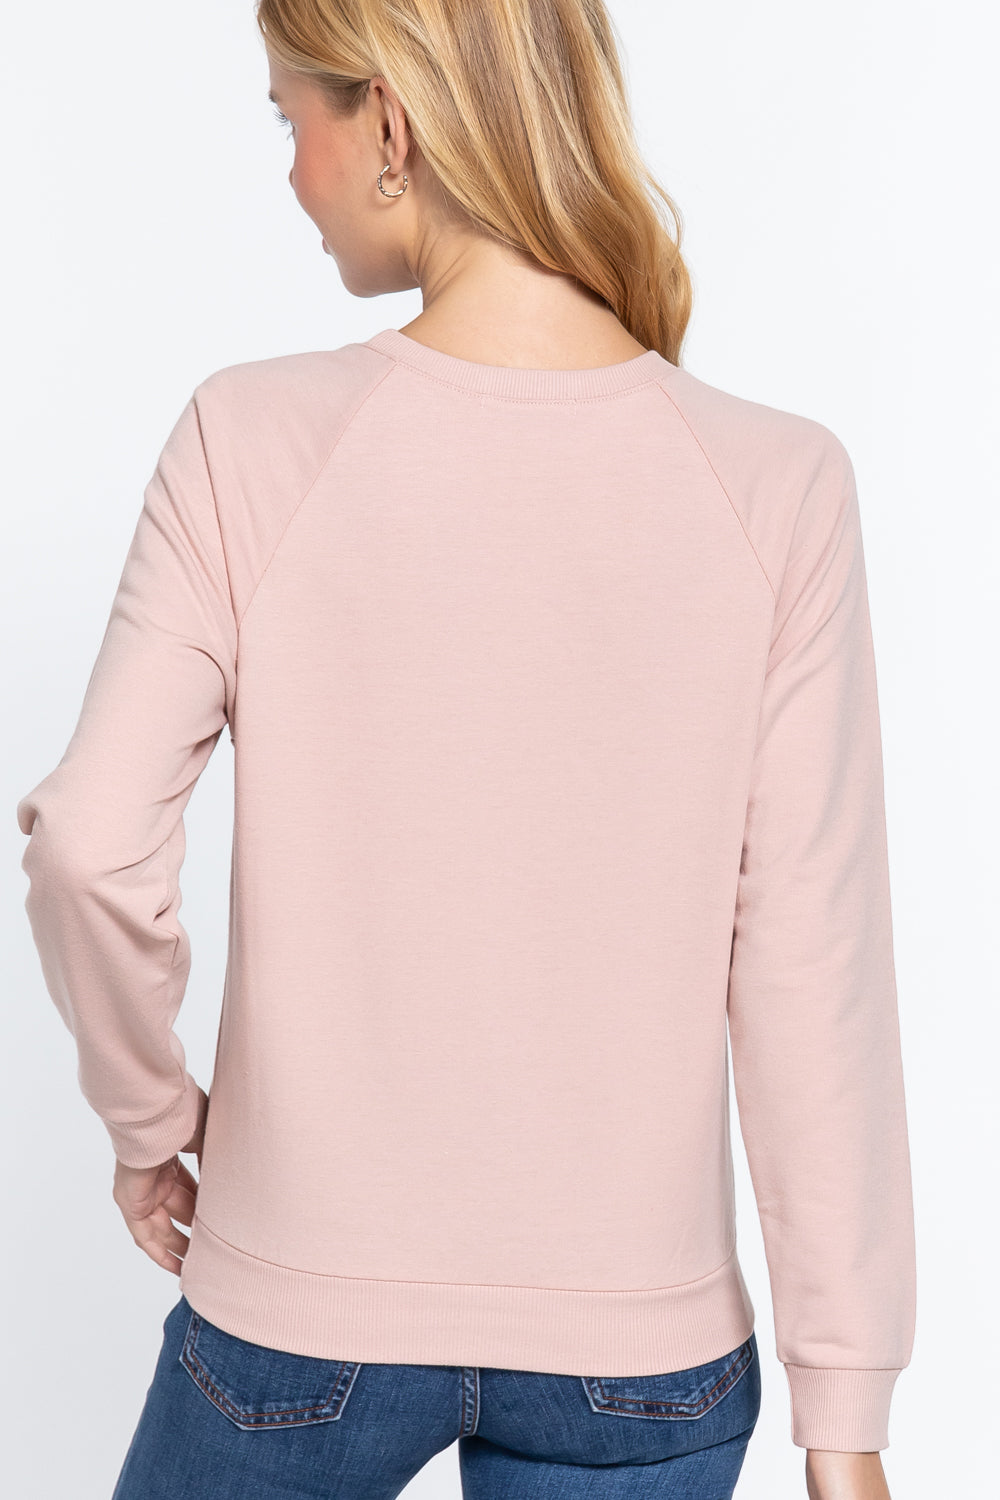 Long Sleeve Sequins French Terry Pullover Top in Pale Pink